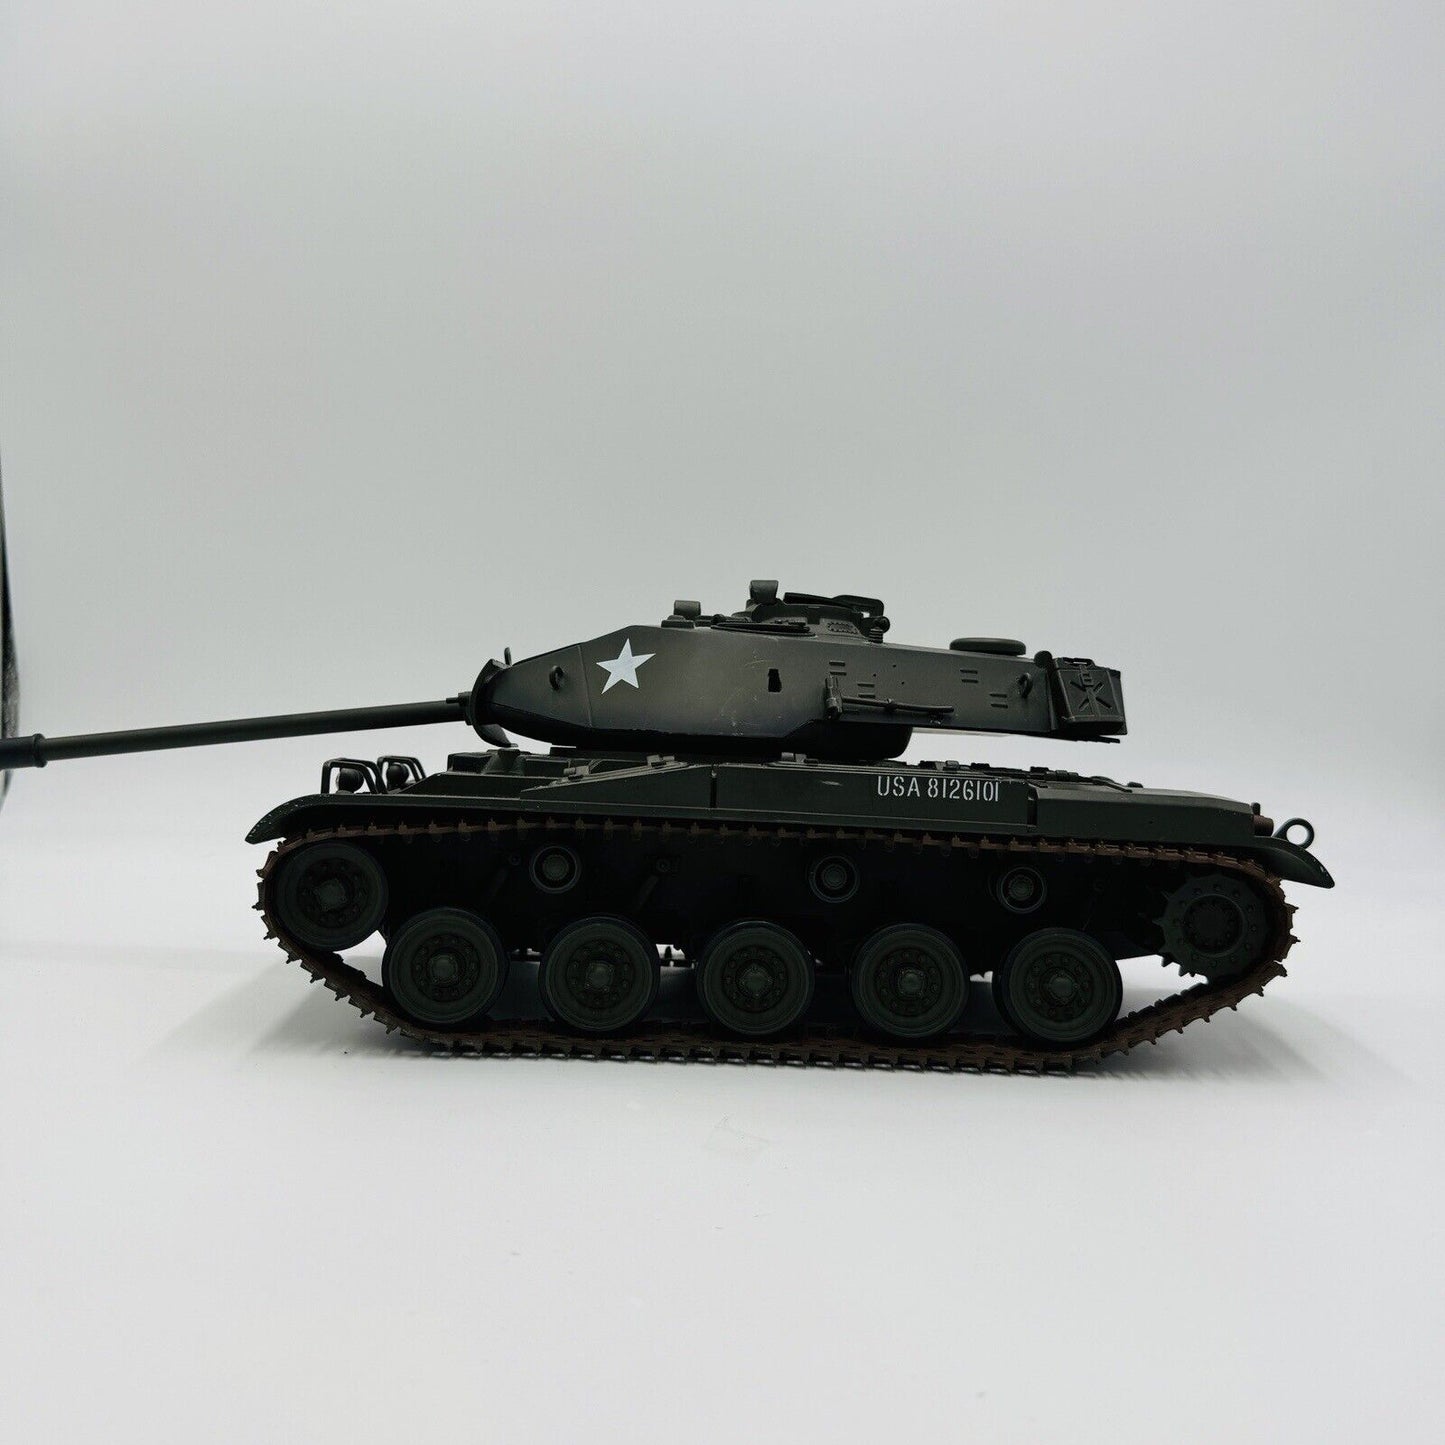 21st century toys WWII battle tank model  USA 812G101 scale 1:32 measures 17”x7”